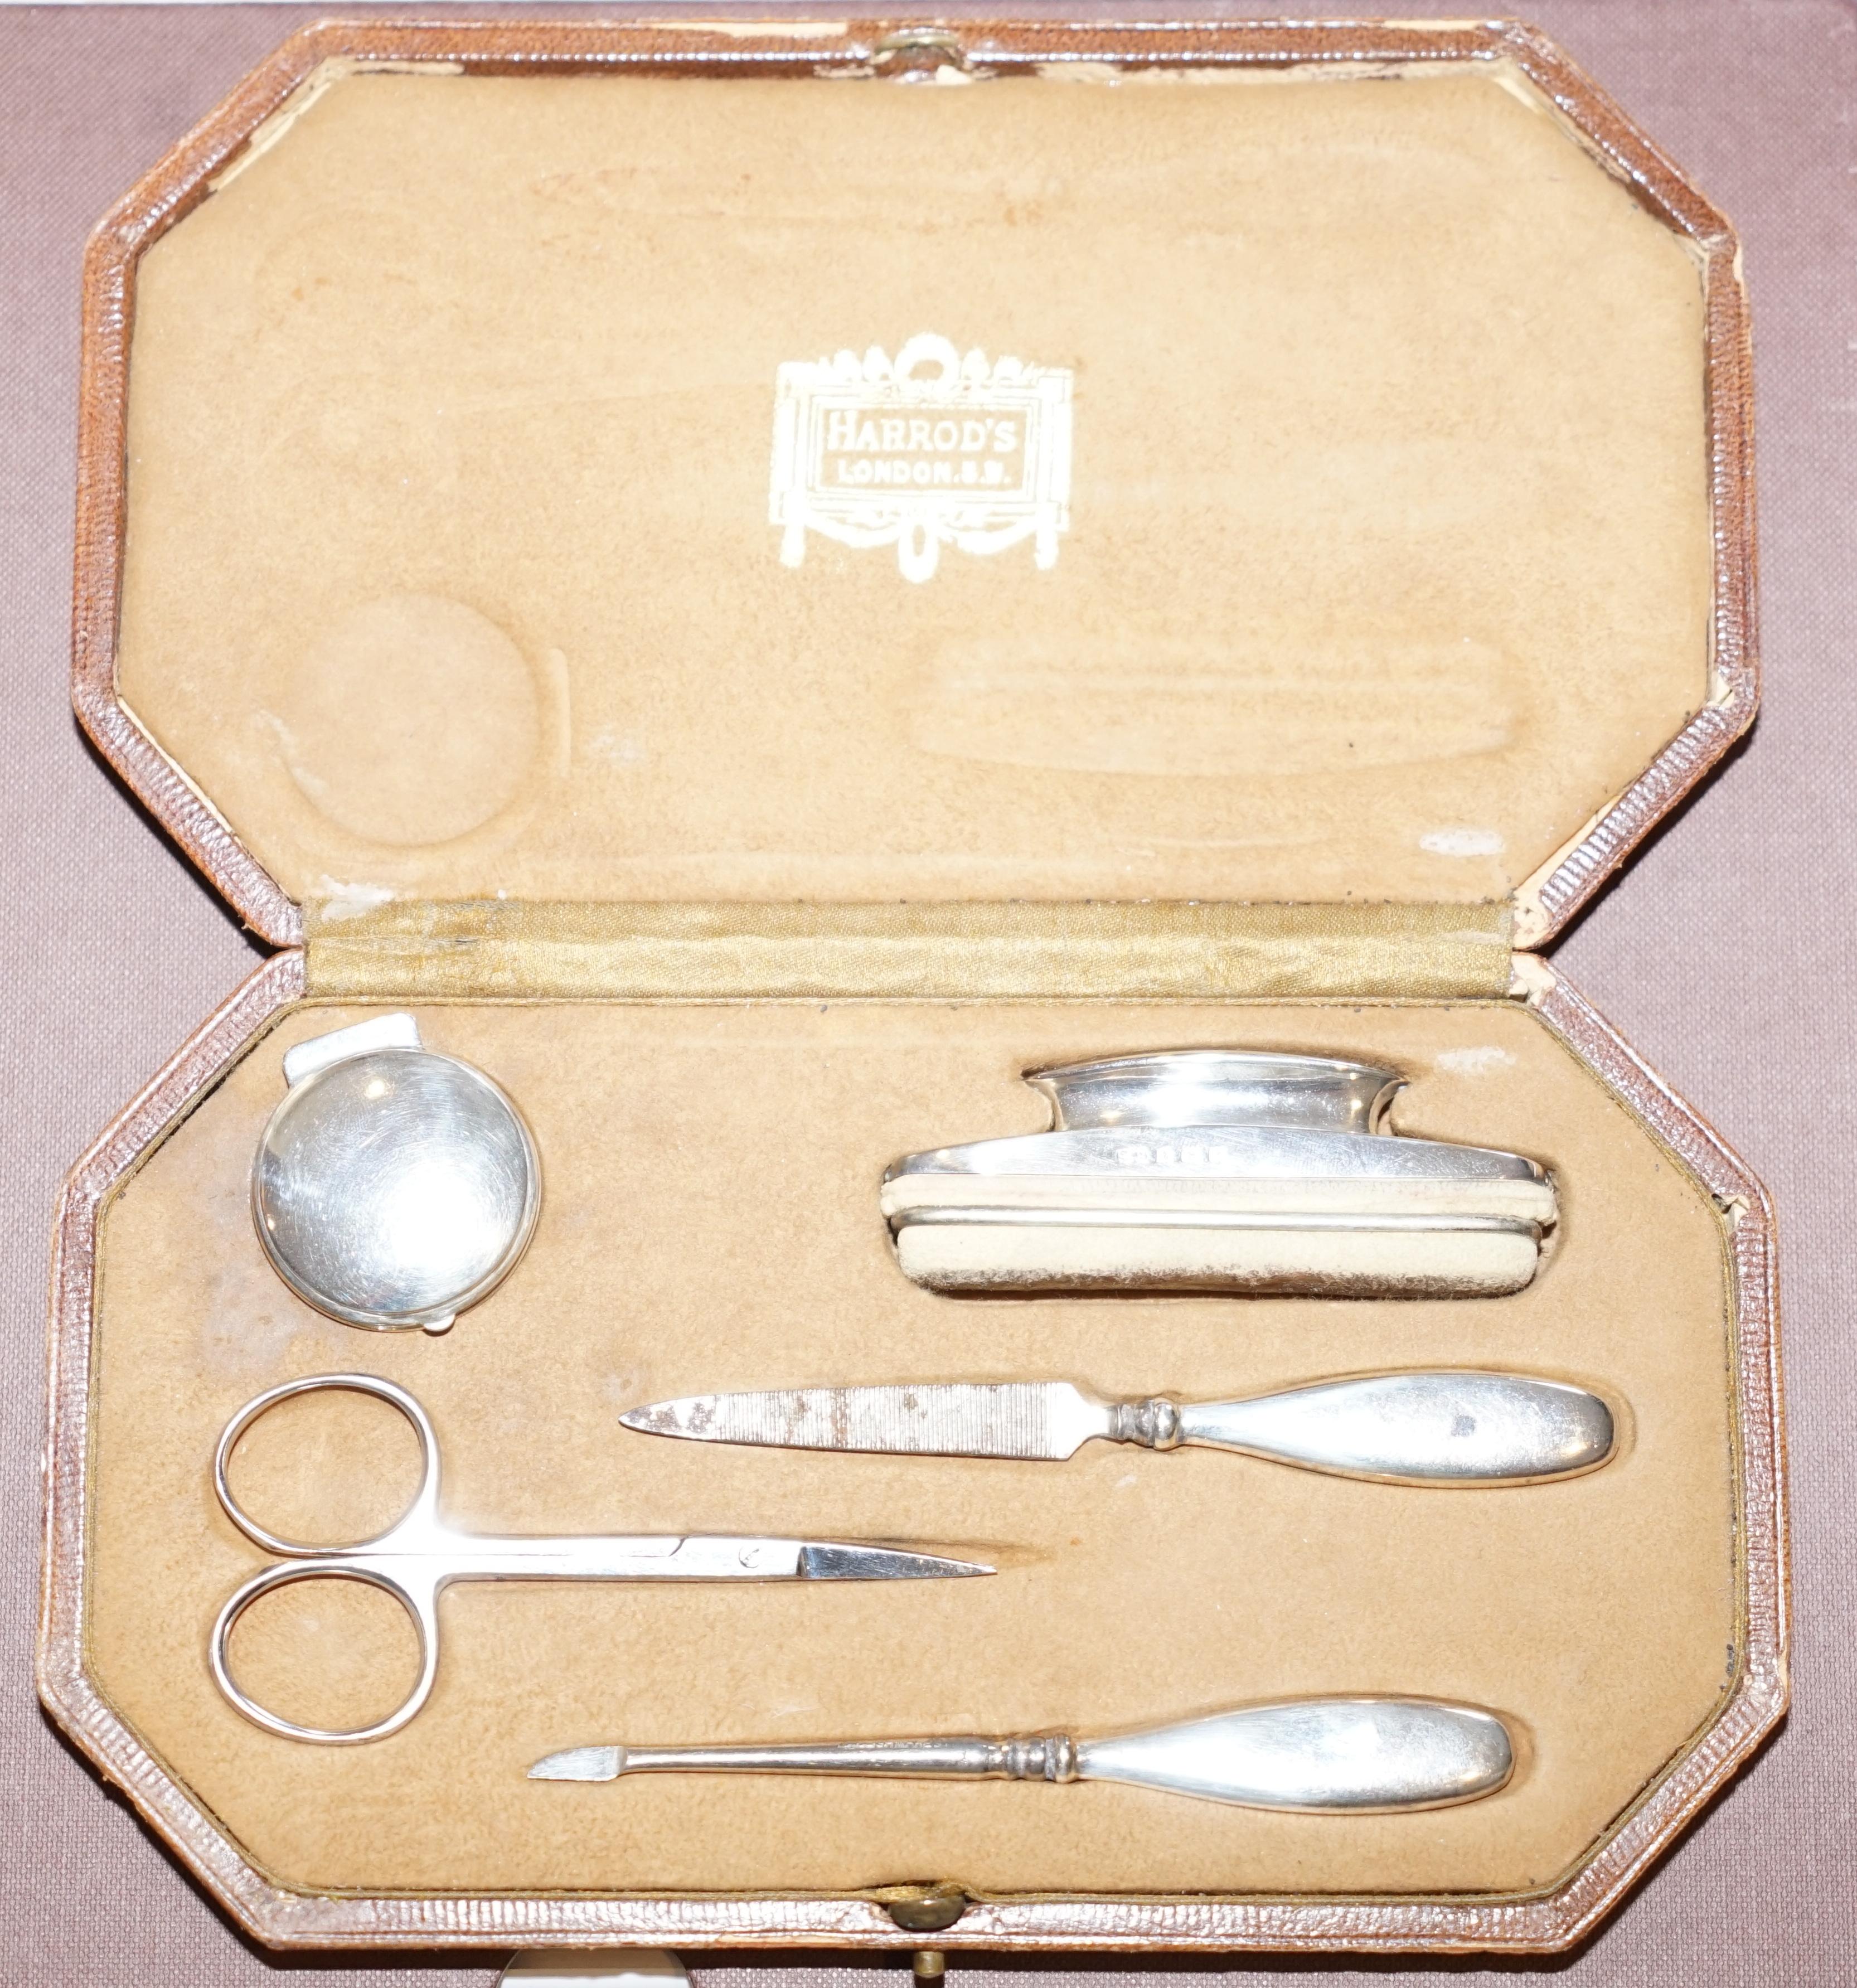 We are delighted to offer for sale this stunning original Harrods London 1923 fully hallmarked sterling silver manicure set.

A very nice smart suite of sterling silver nail tools in the original Harrods London case. Each piece is hallmarked SM